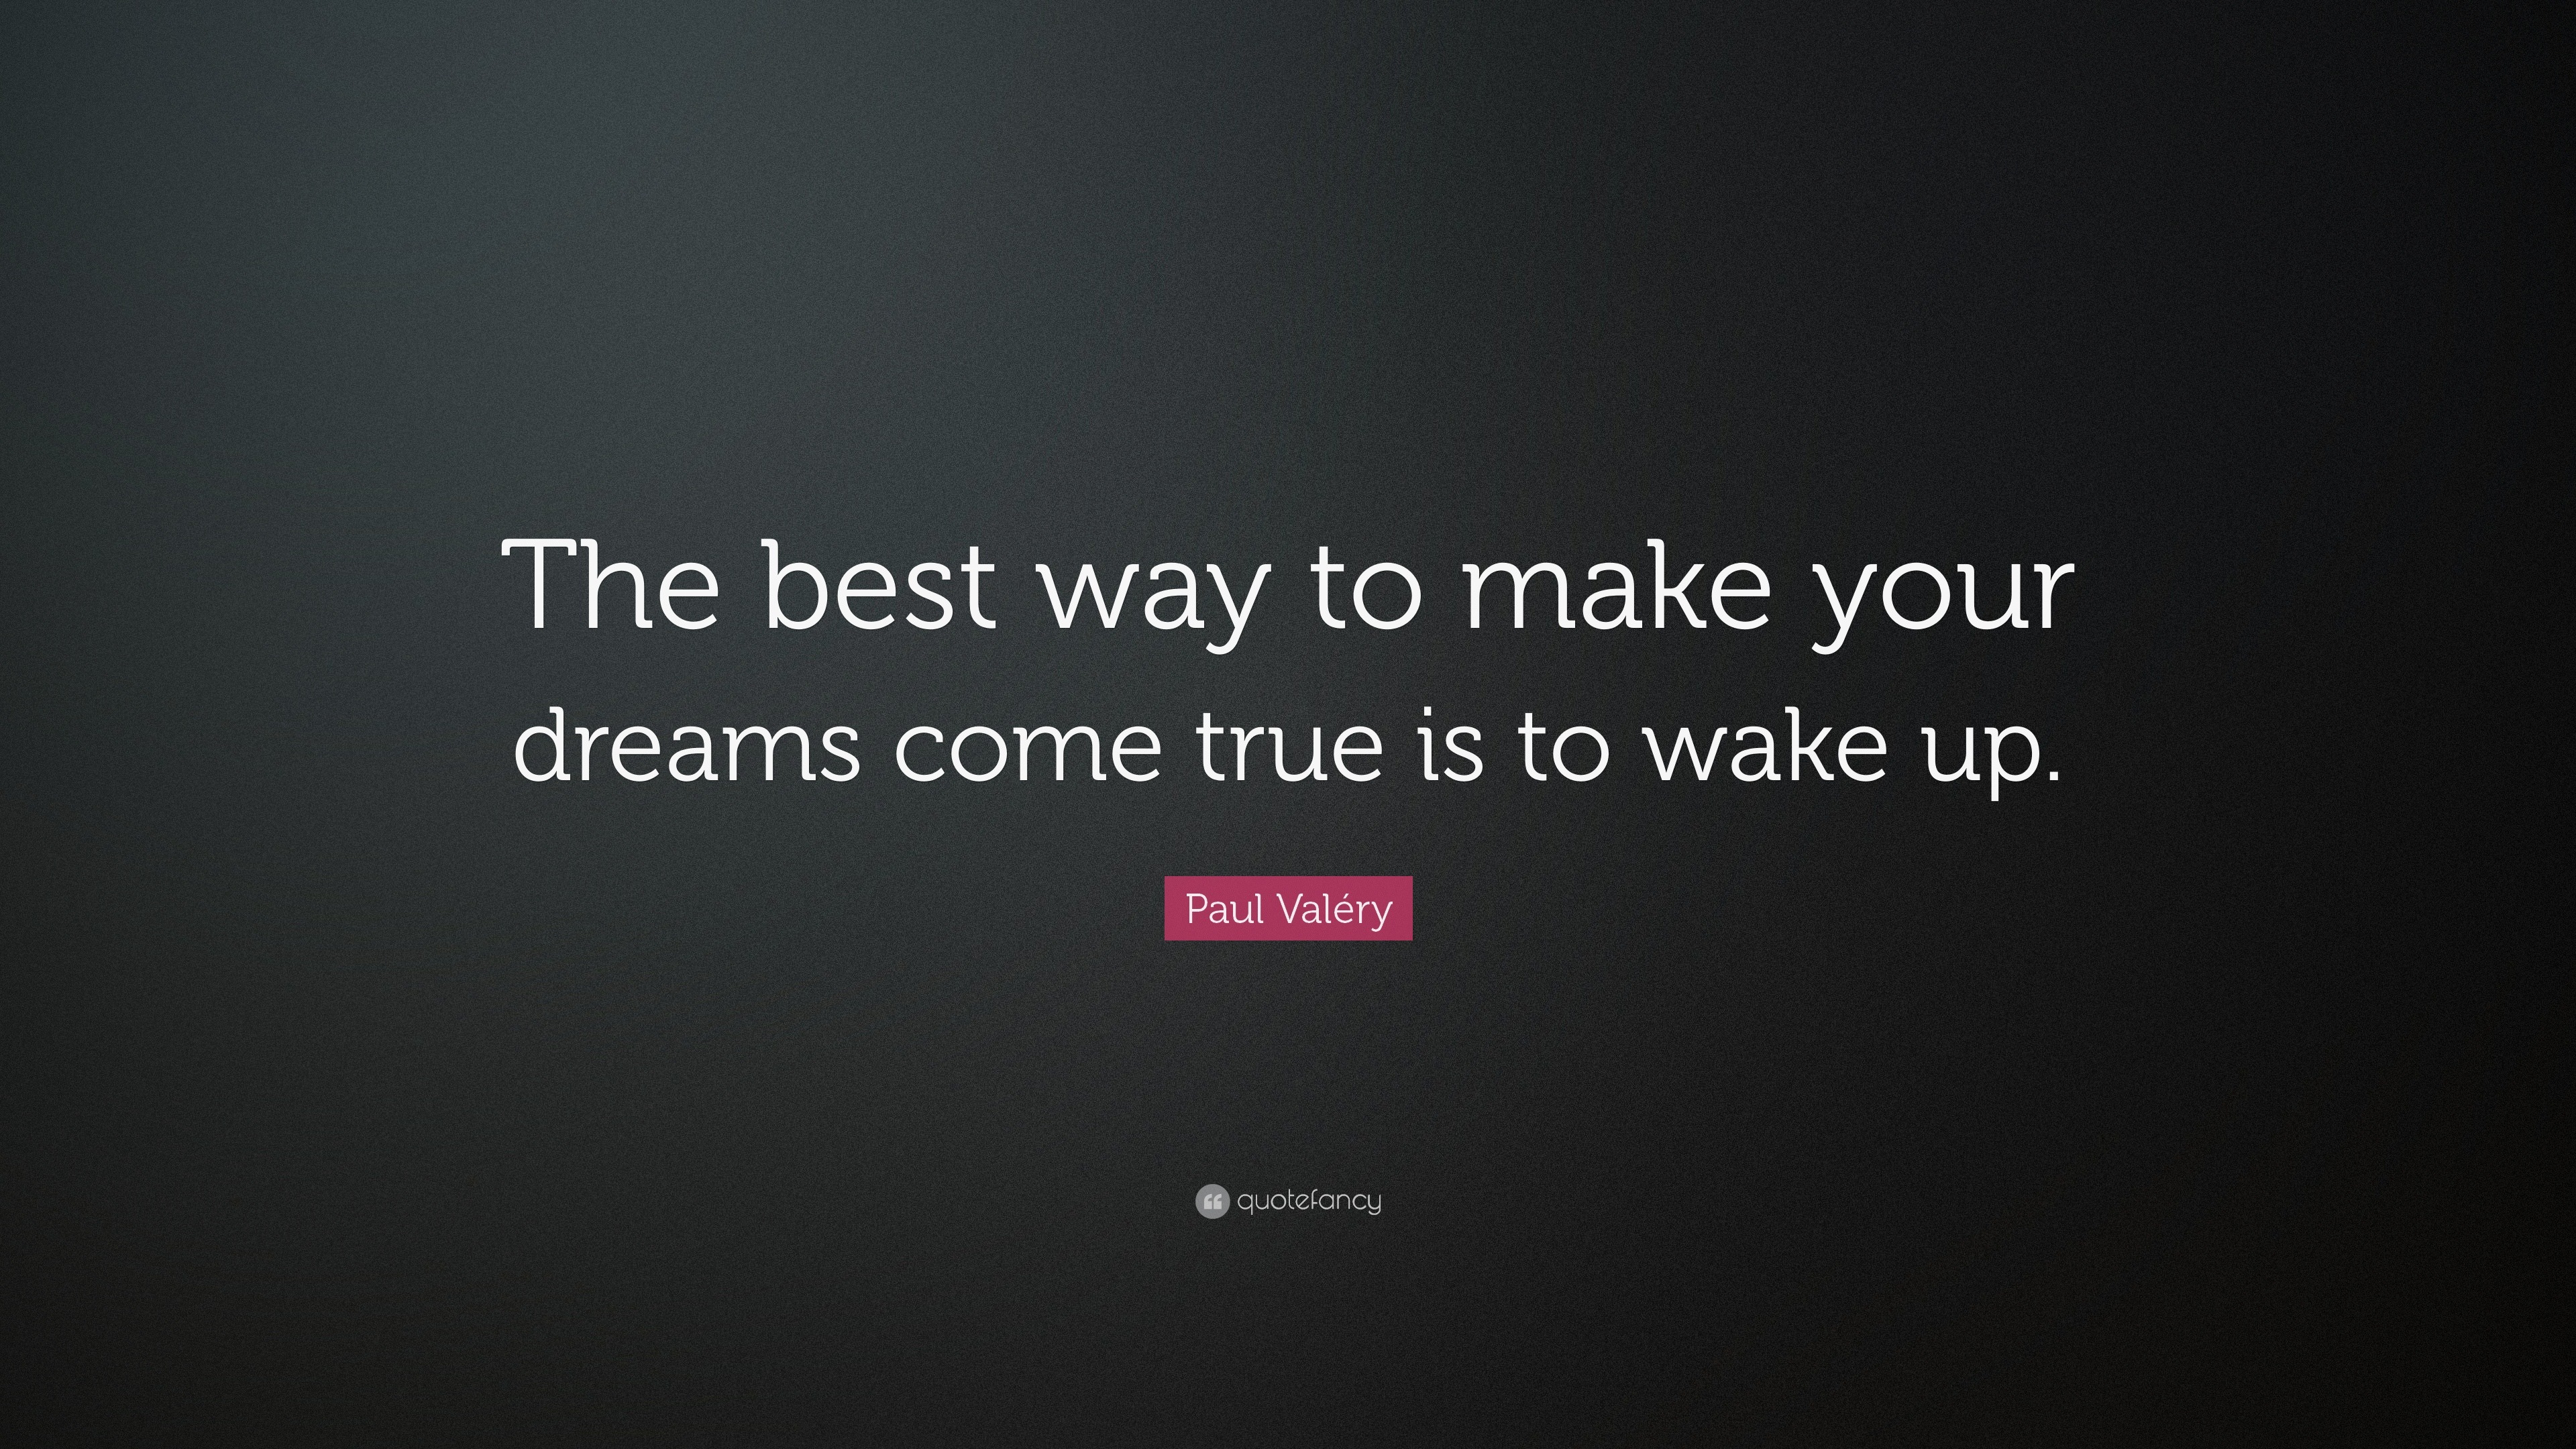 Paul Valéry Quote: “The best way to make your dreams come true is to